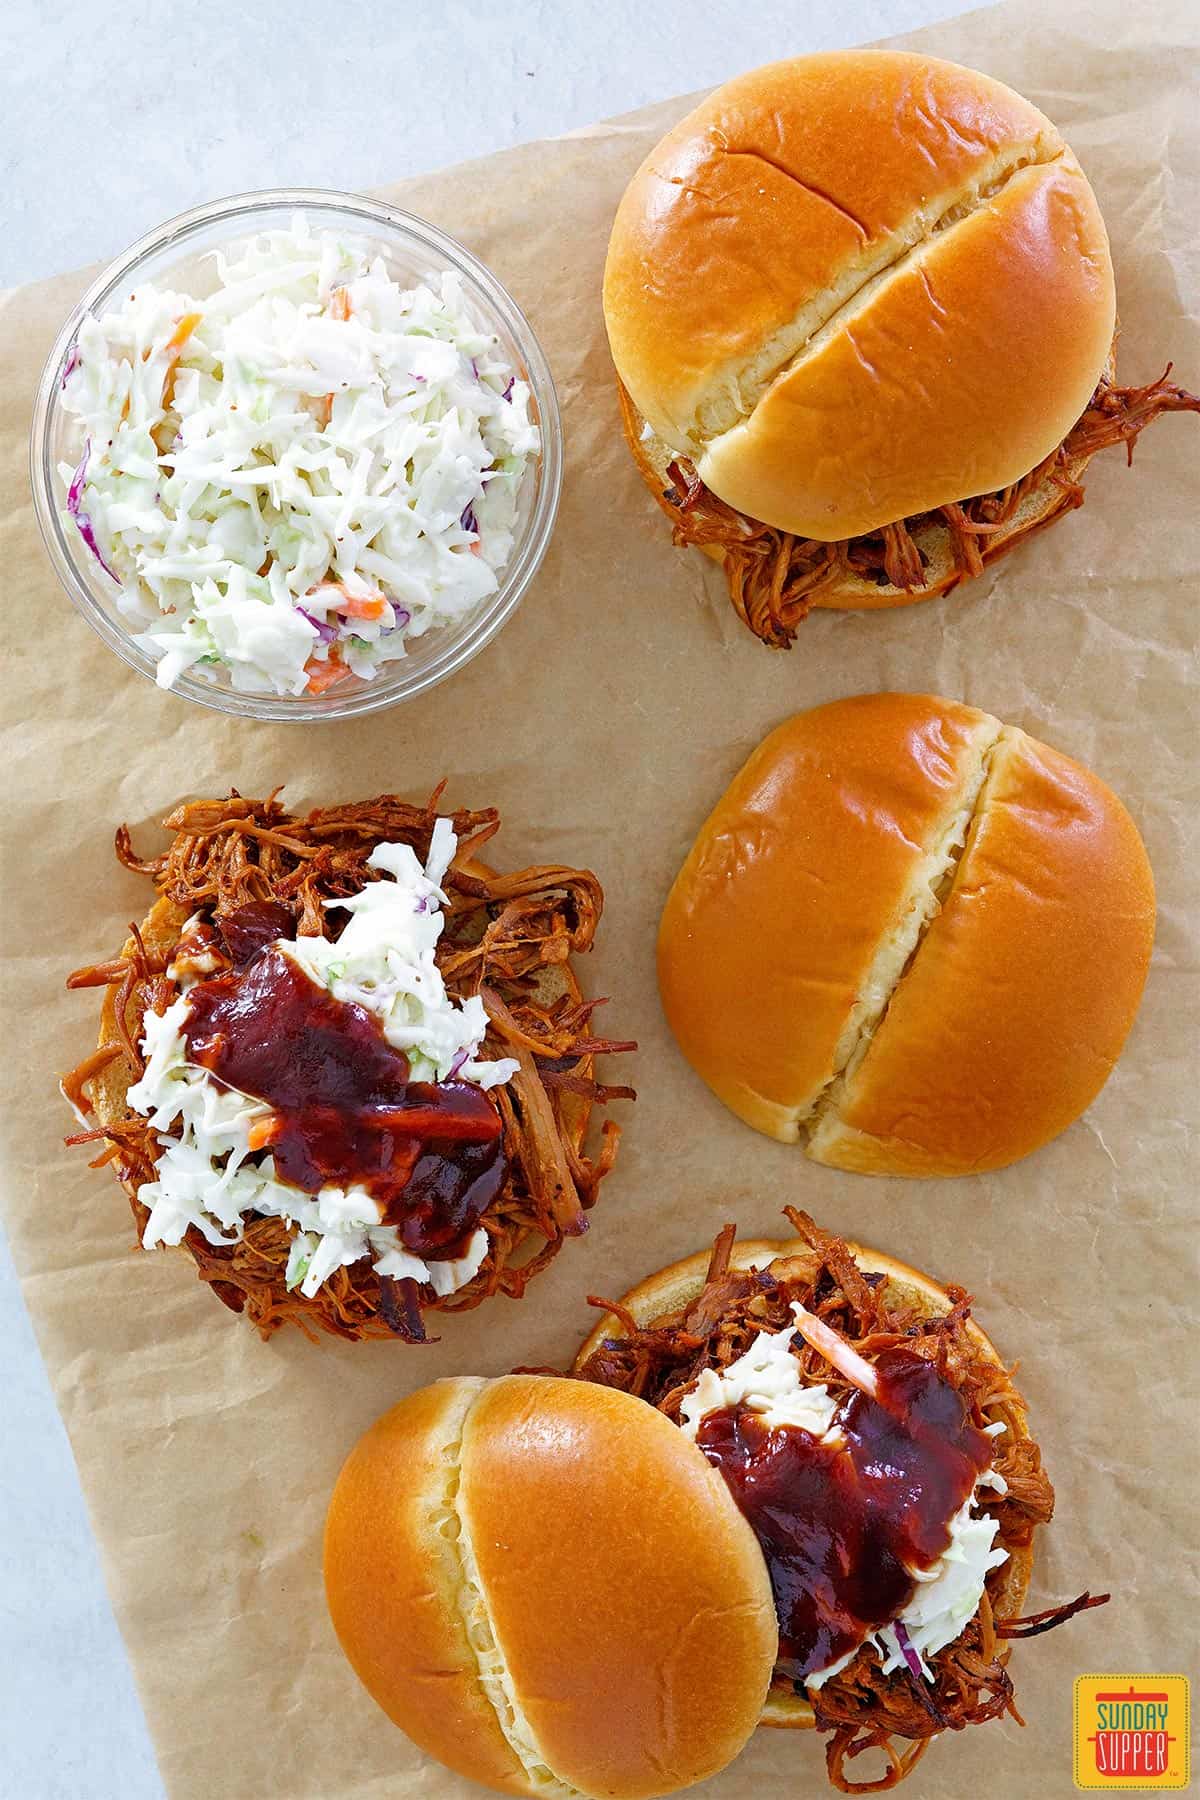 Pulled pork sandwiches with coleslaw